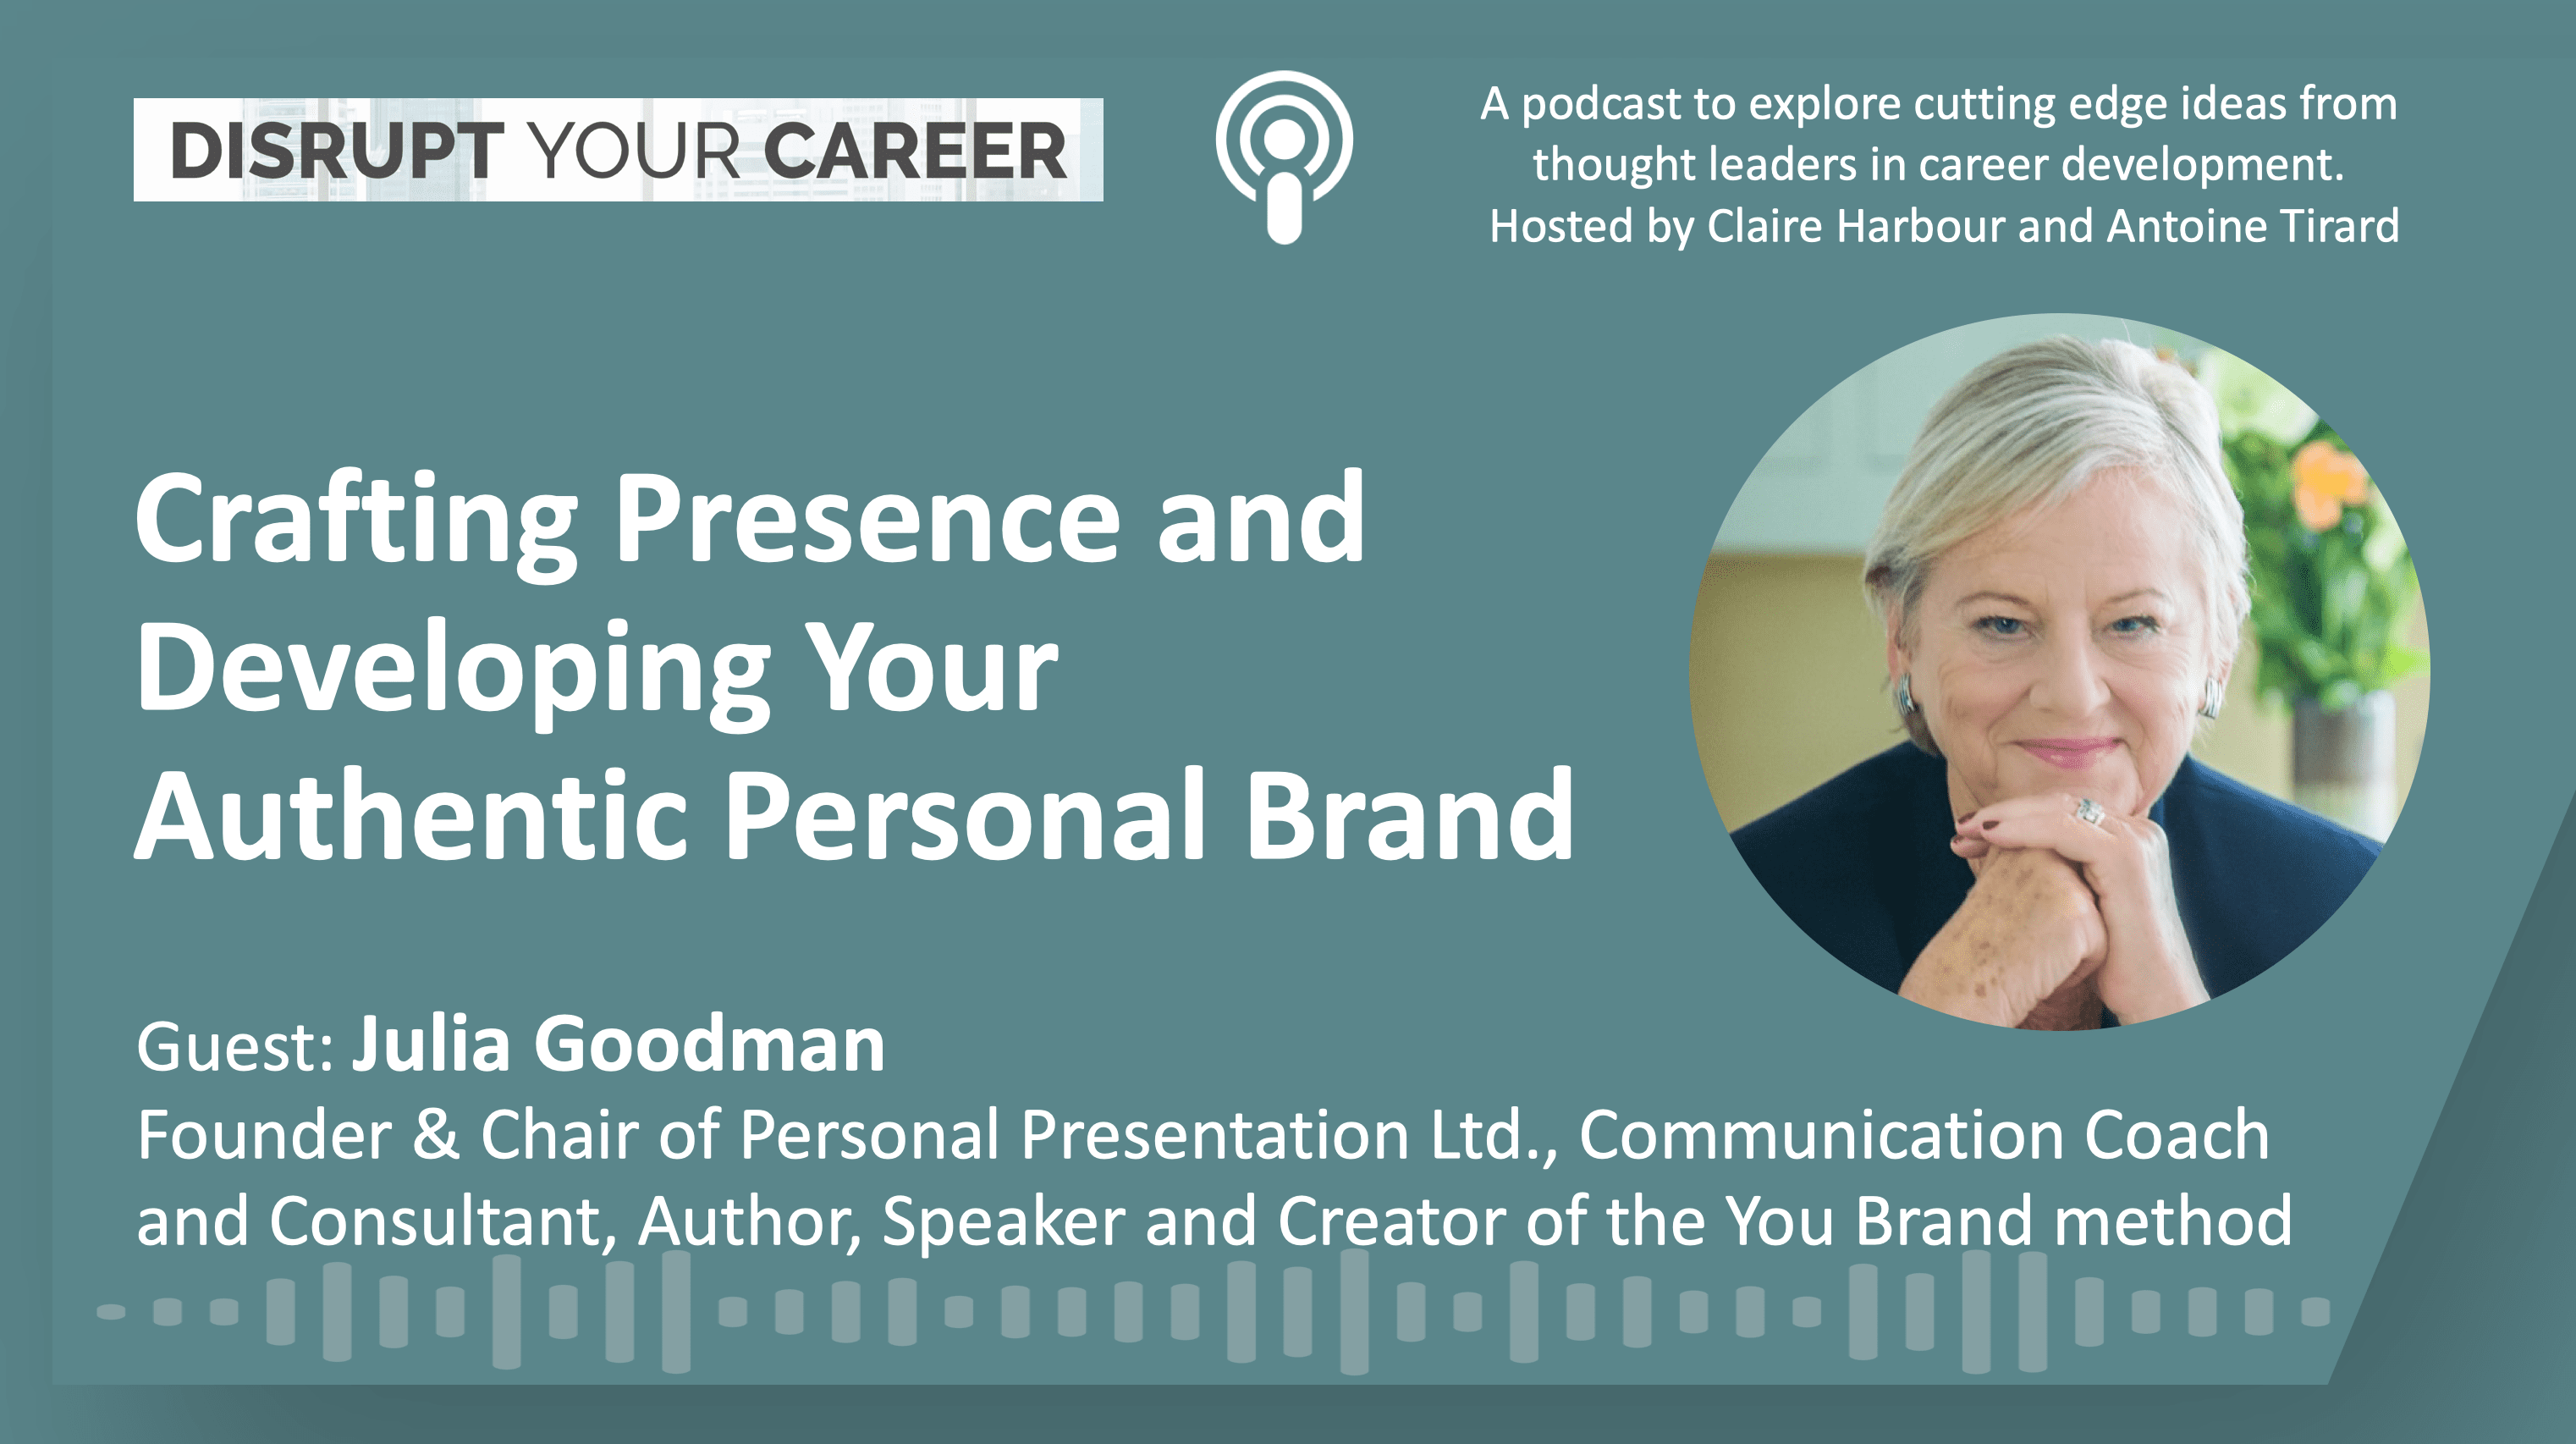 Crafting Presence and Developing Your Authentic Personal Brand